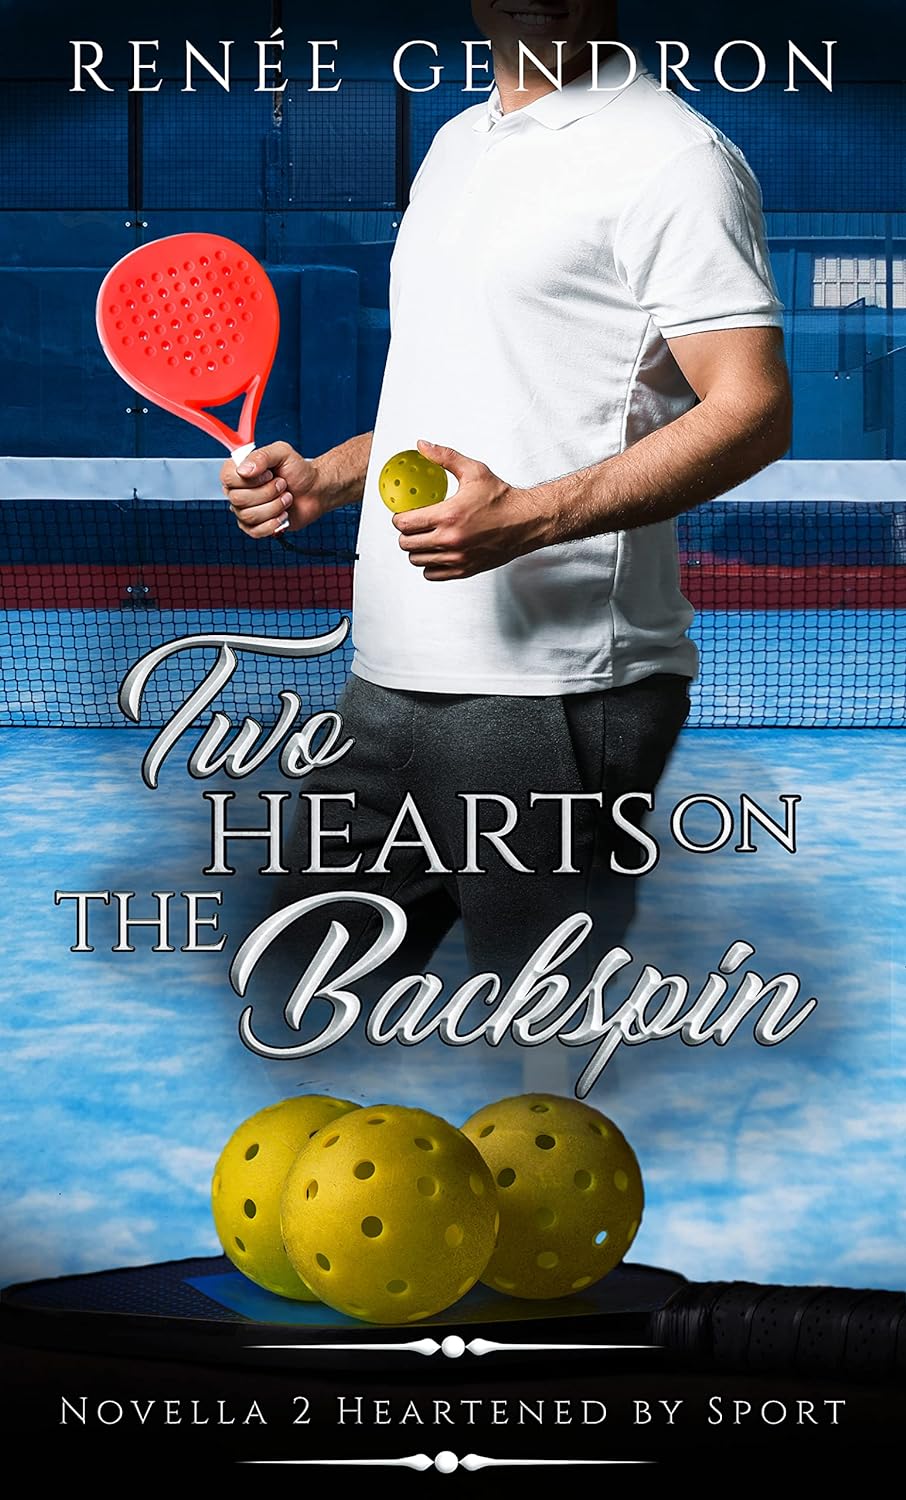 Man holding pickleball racket in front of a pickleball court; Two Hearts on the Backspin by Renée Gendron; 1/31/2023